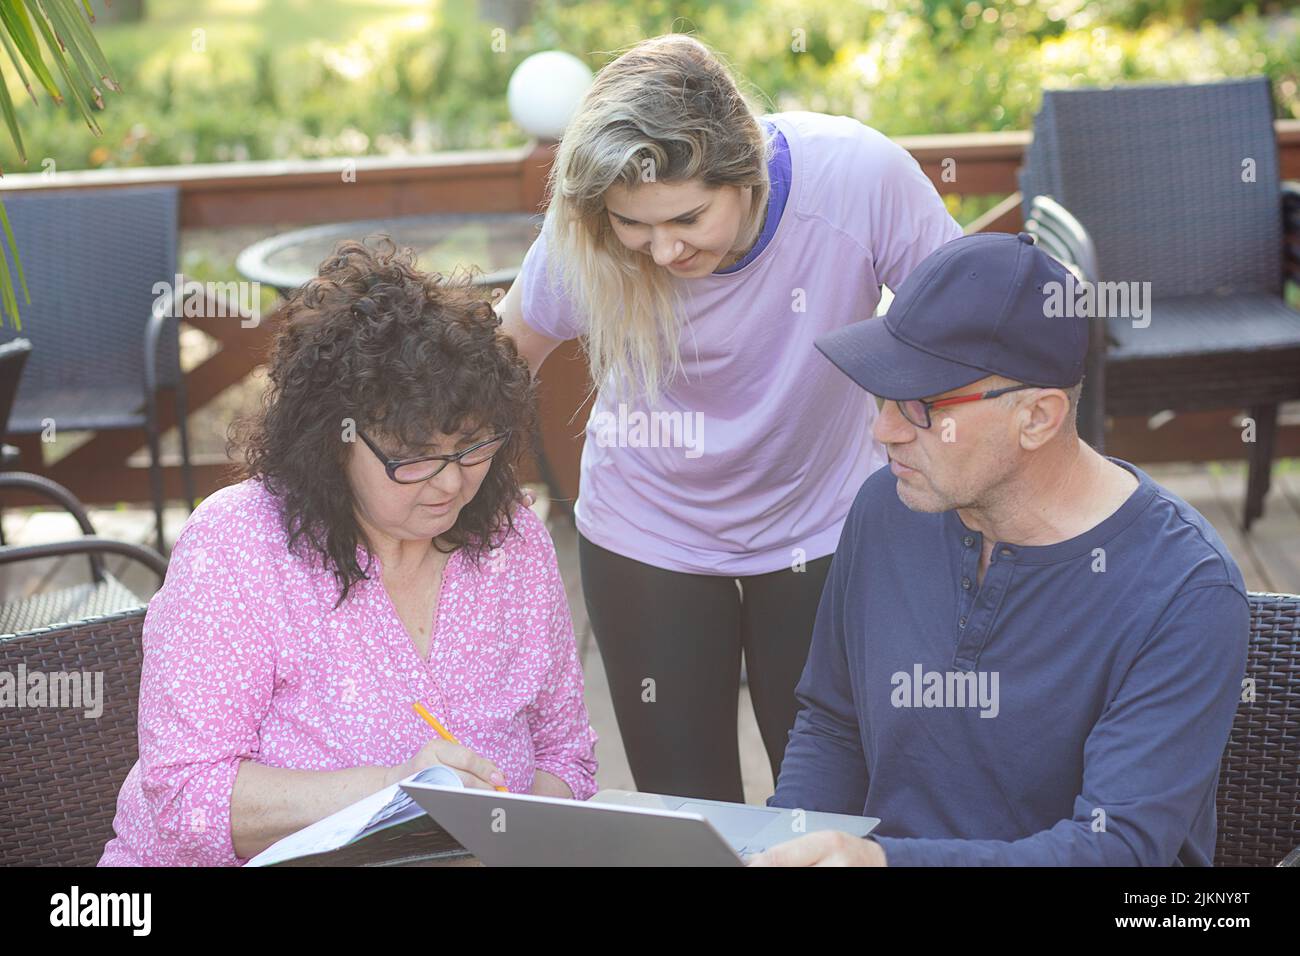 Portrait of family sitting at table. Young woman daughter looking at screen of laptop, explaining to middle-aged couple. Stock Photo